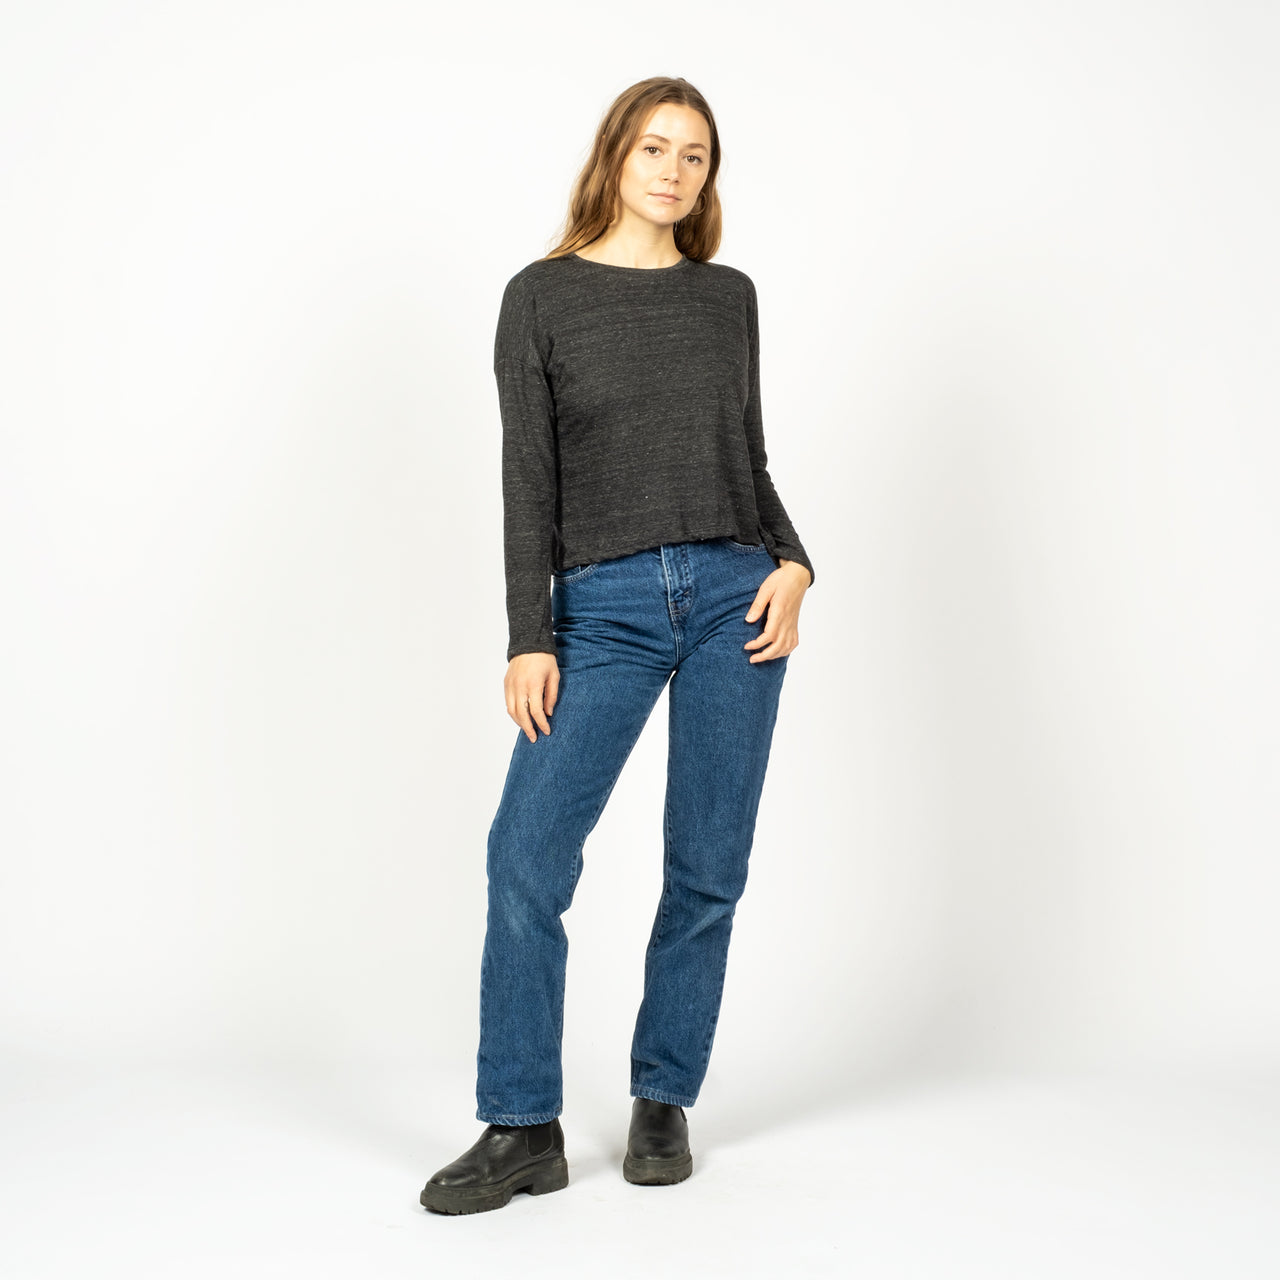 Women's Long Sleeved Relaxed Fit Tee - Charcoal